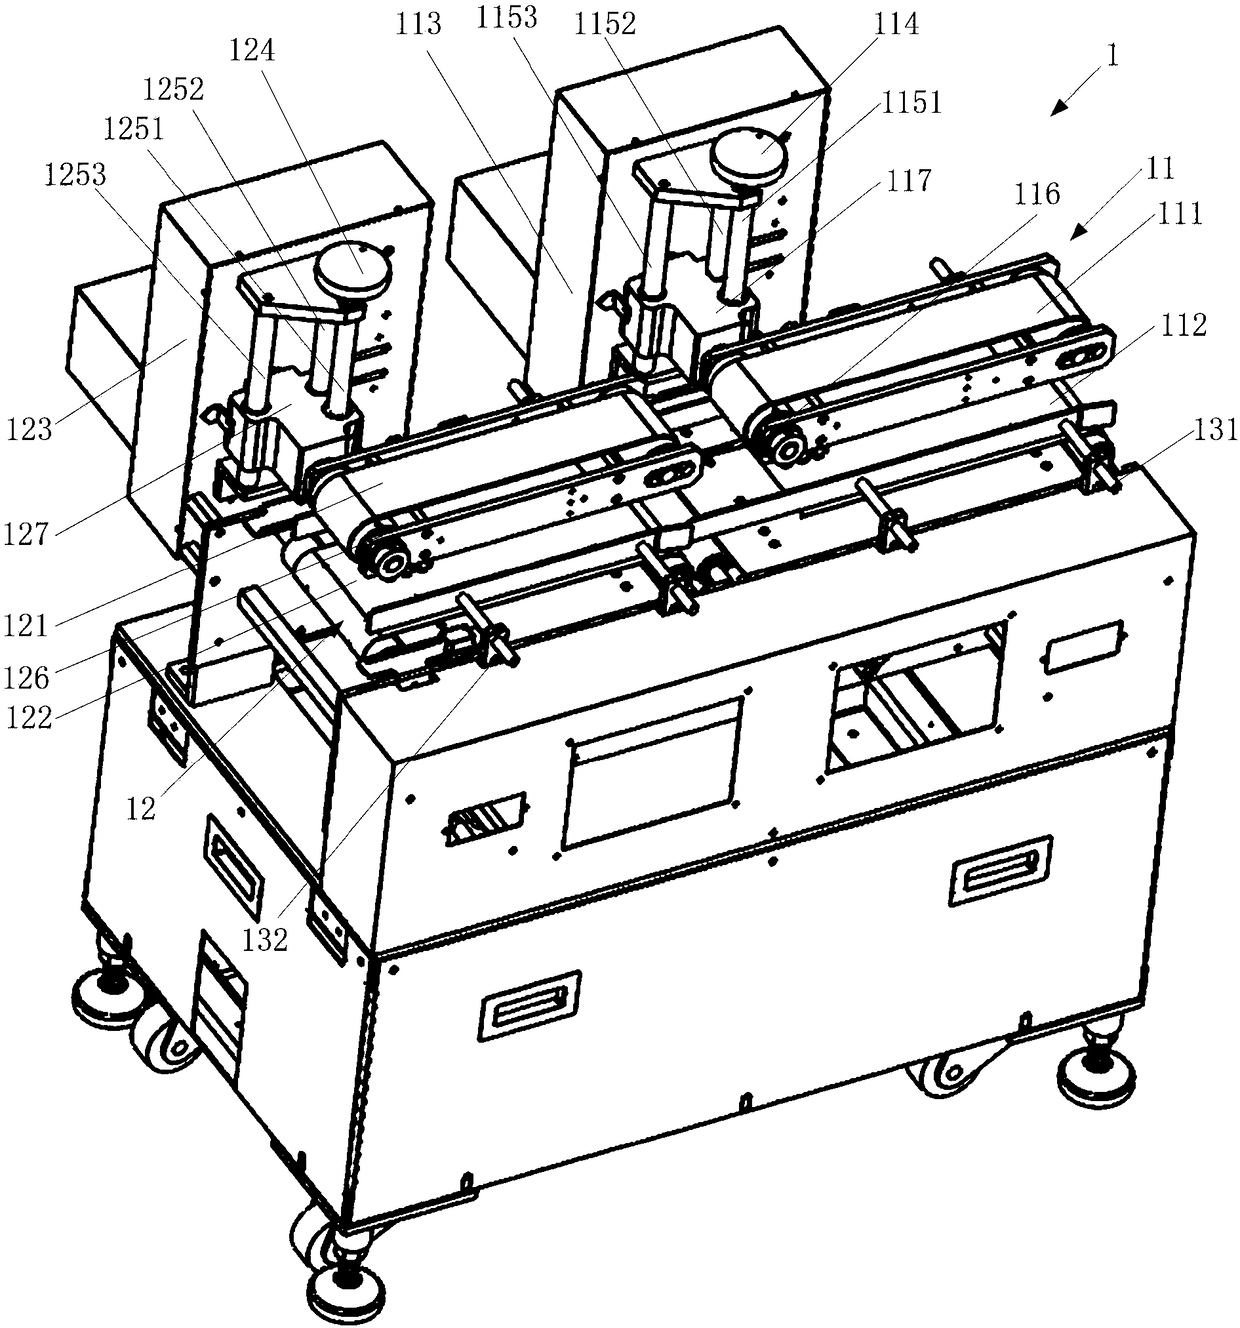 Full servo control material-box-type collecting and accumulating device